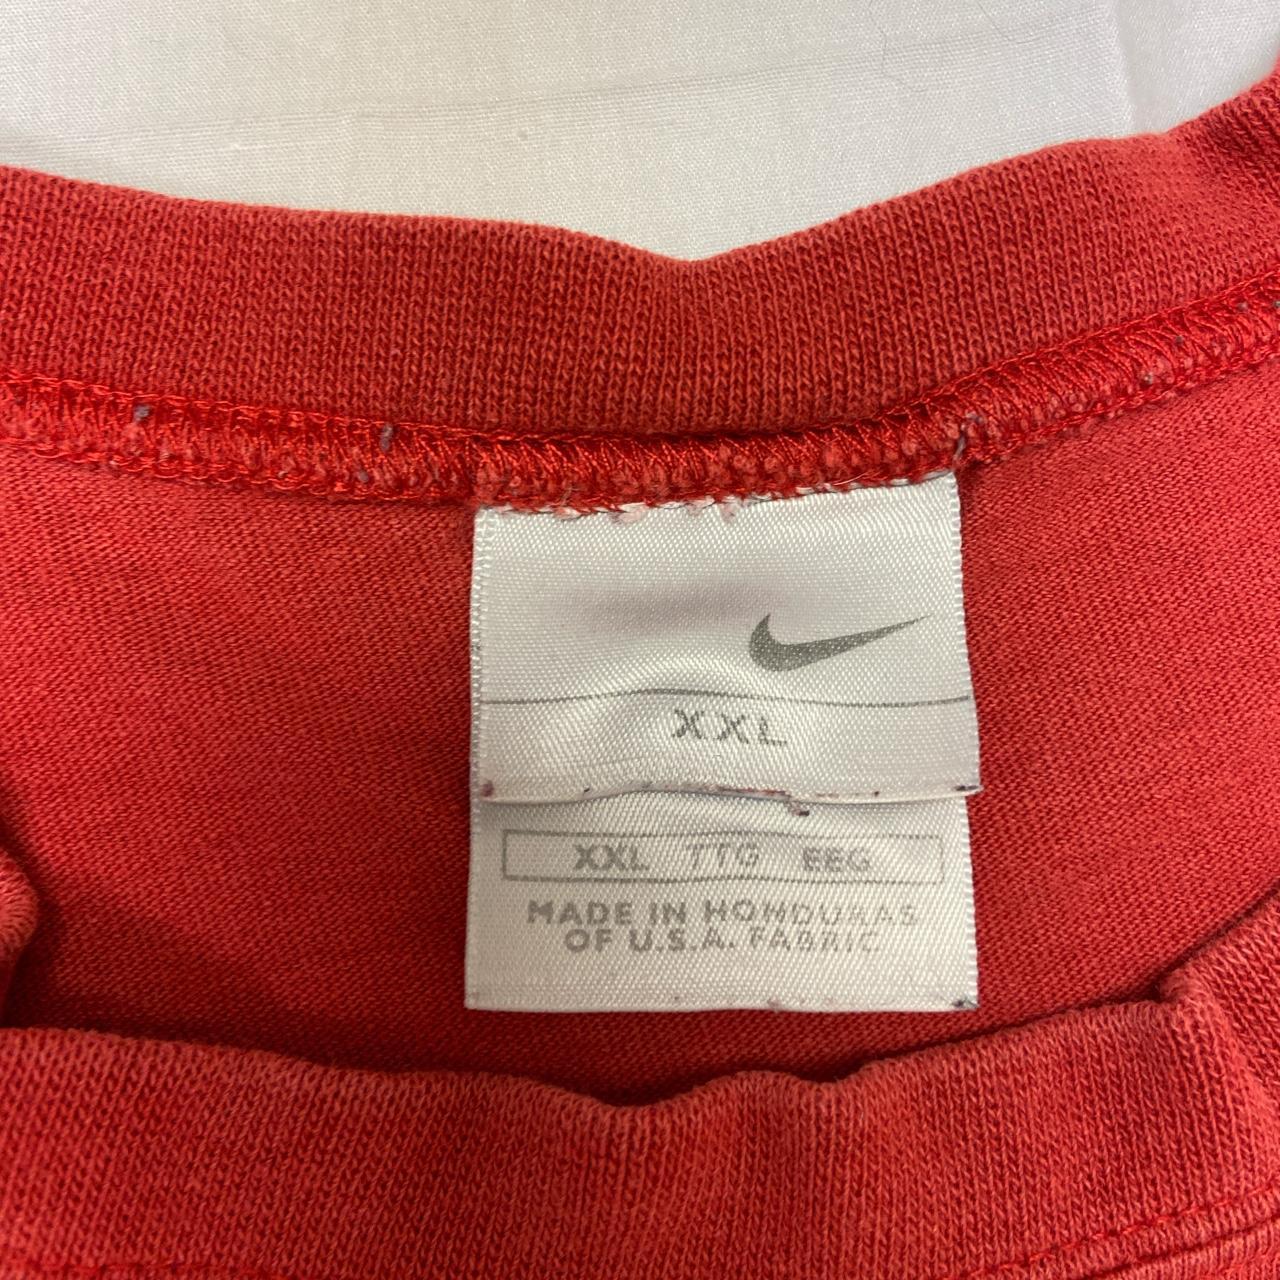 Nike Men's Red and Navy Vest (3)